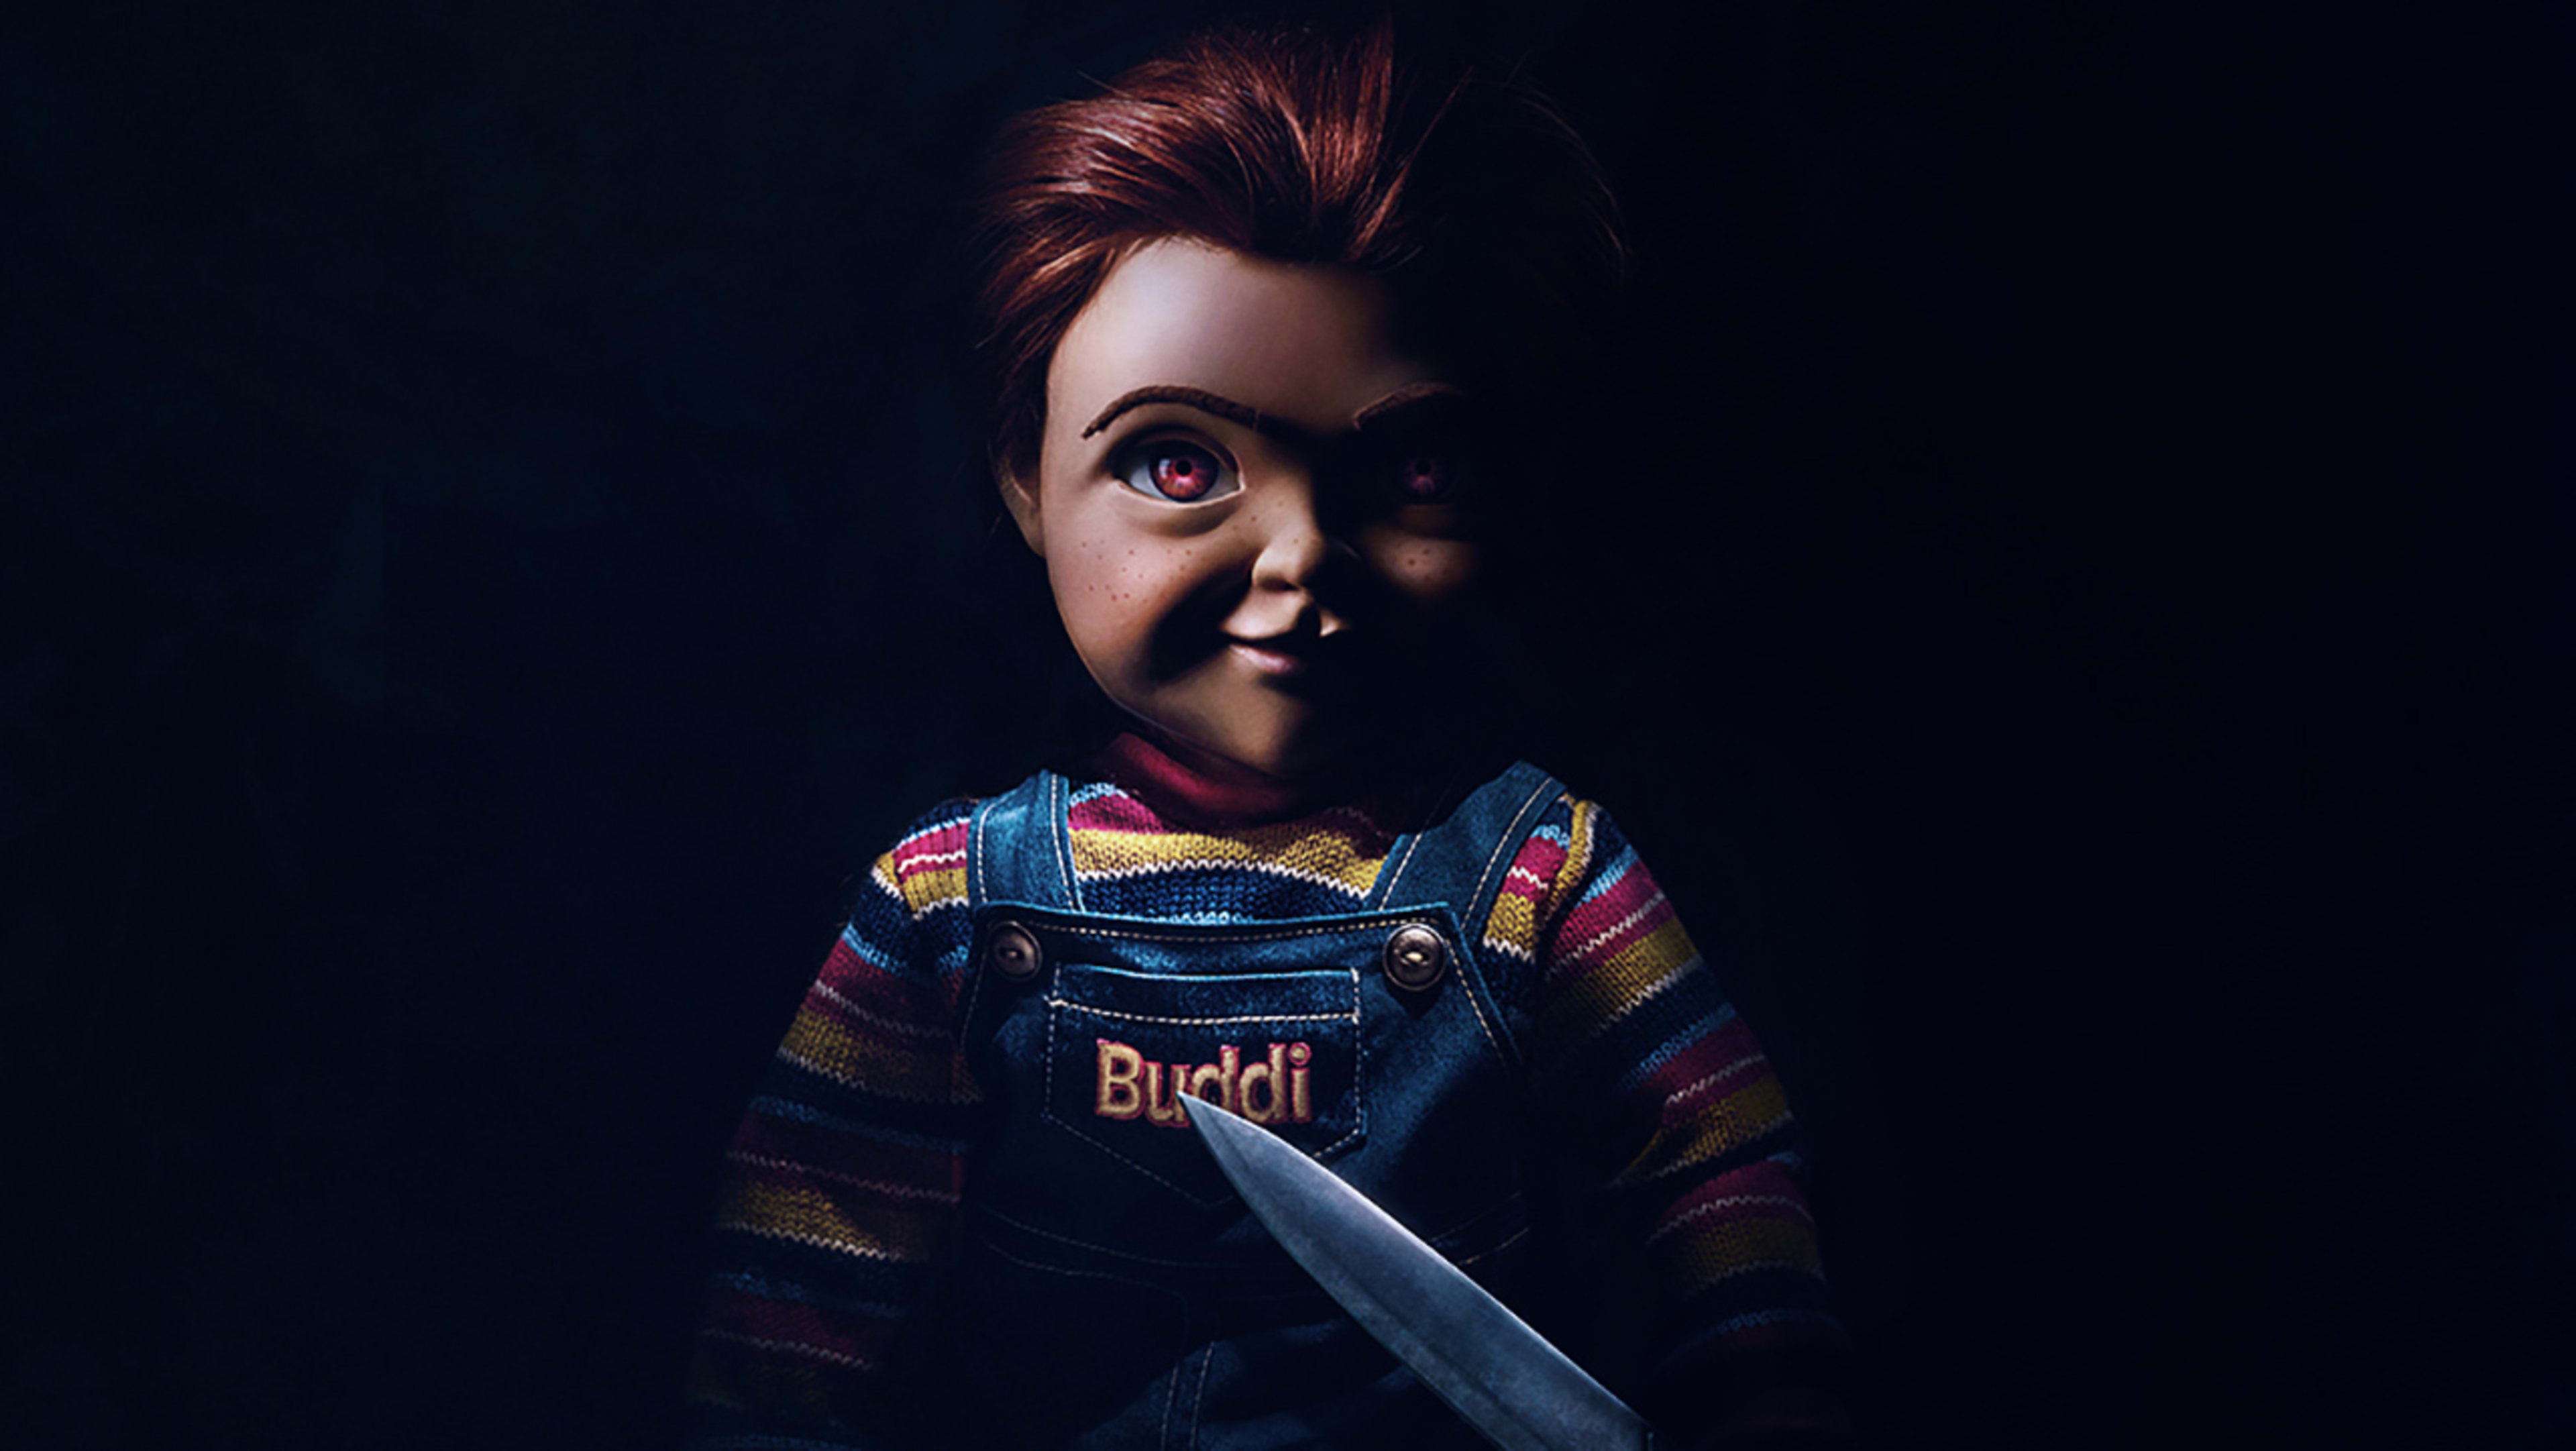 Chucky is out for Woody’s blood in this cheeky “Child’s Play” poster